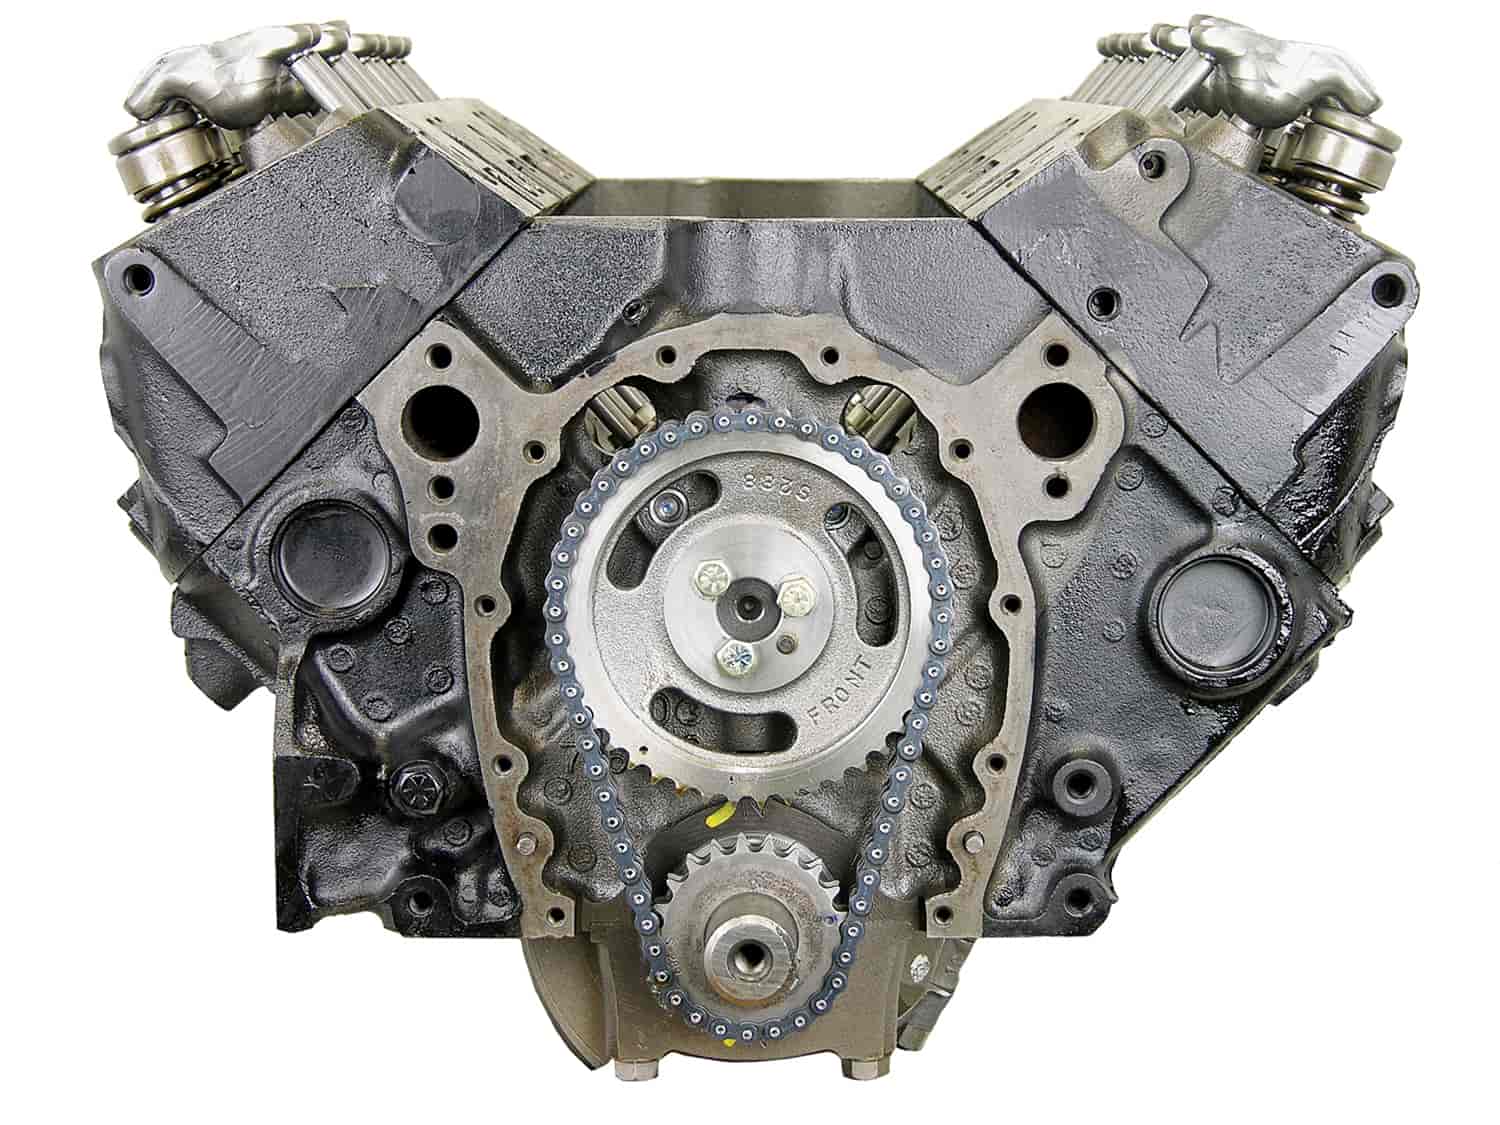 Remanufactured Crate Engine for Marine Applications with 1964-1980 Small Block Chevy 350ci/5.7L